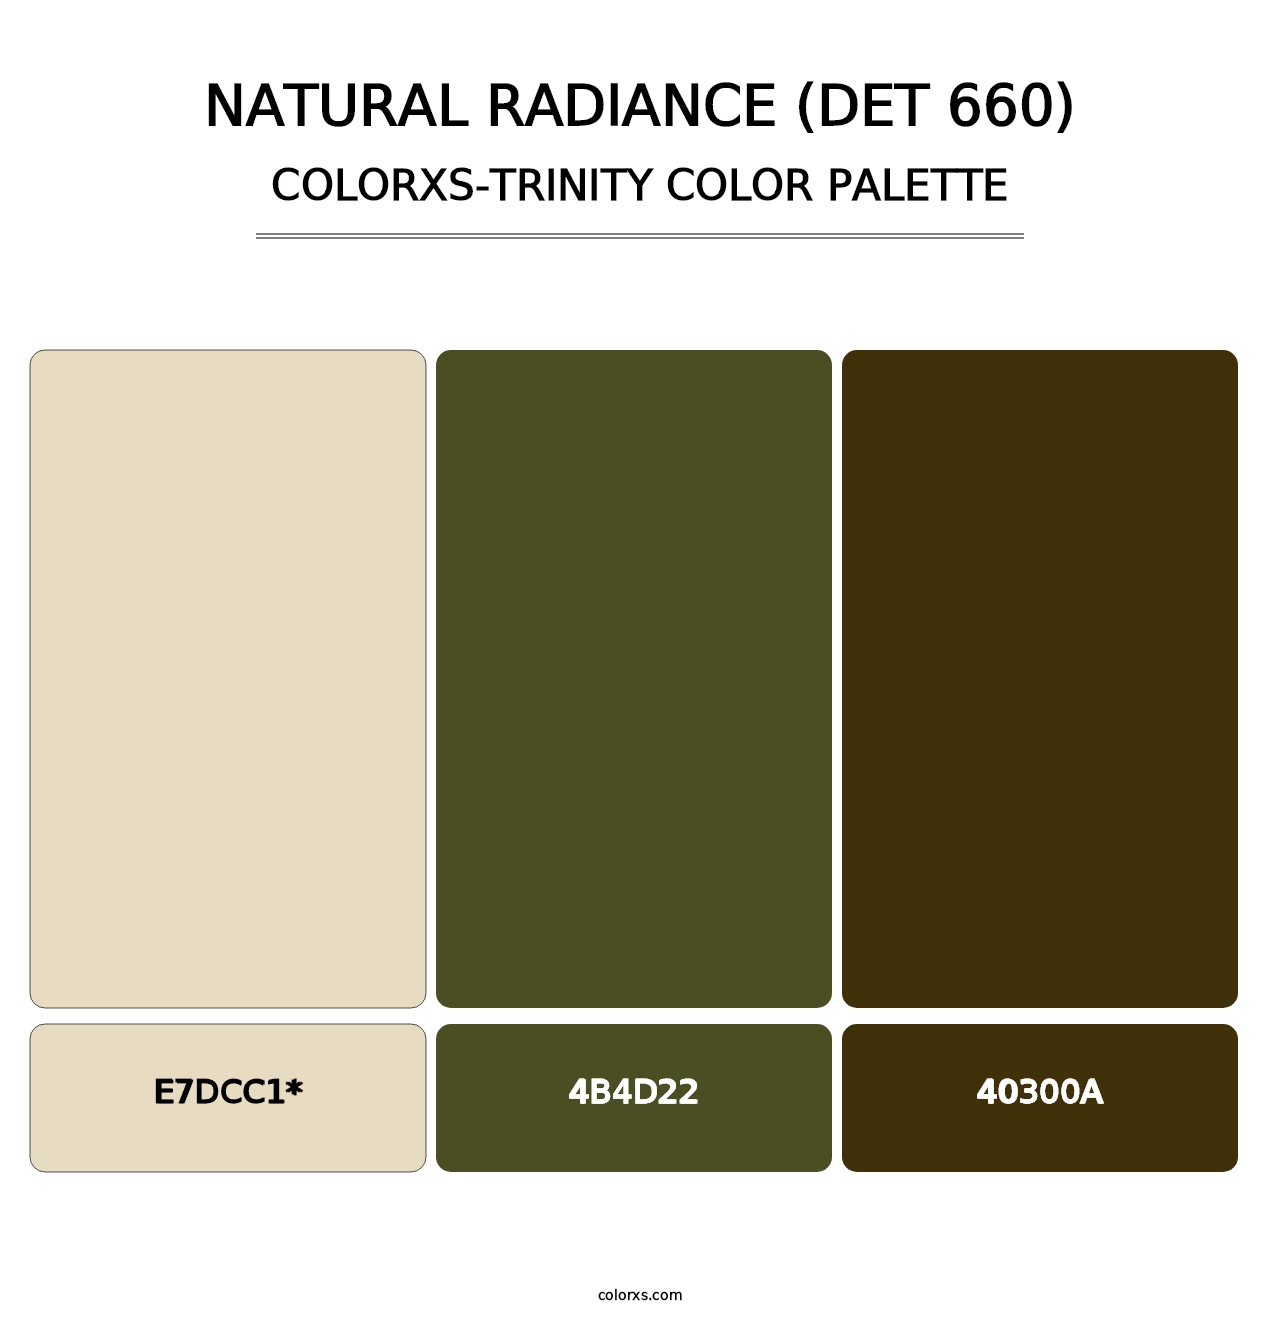 Natural Radiance (DET 660) - Colorxs Trinity Palette